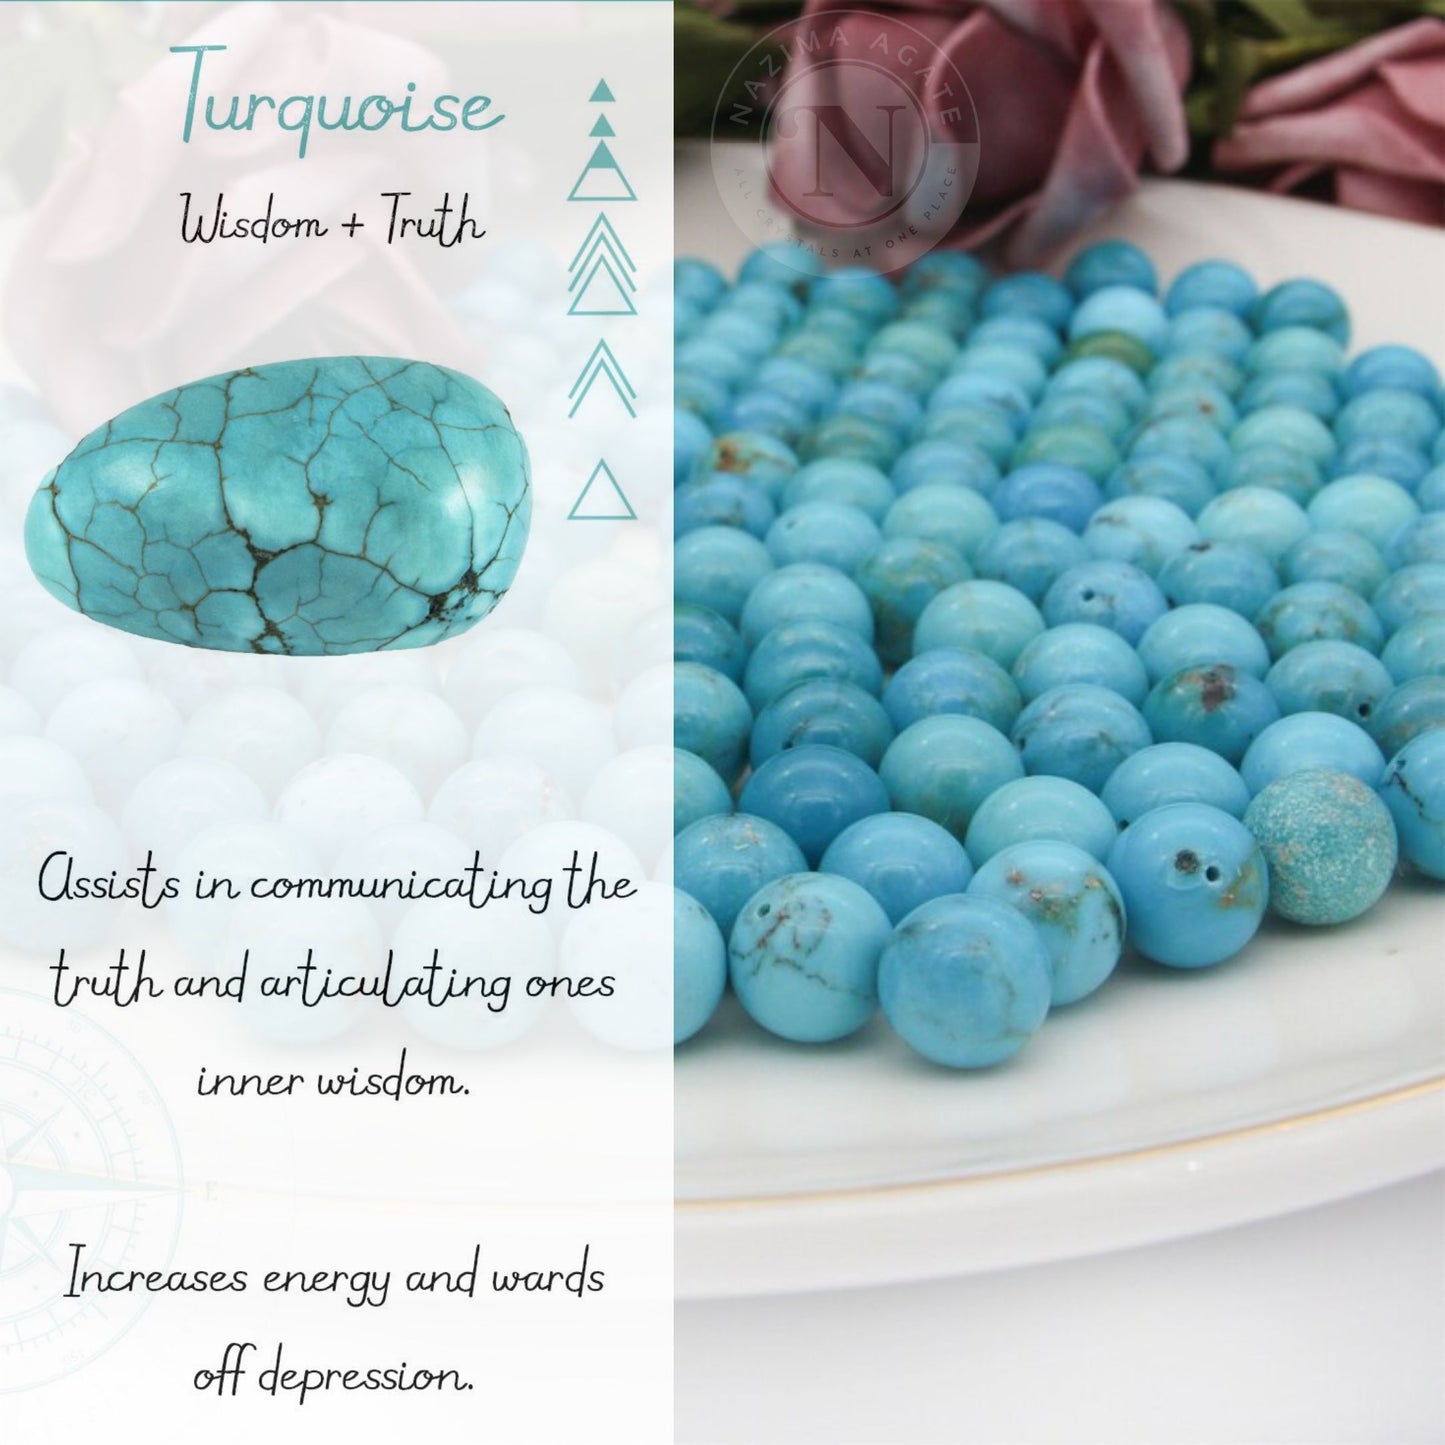 NATURAL TURQUOISE LOOSE BEADS 8MM